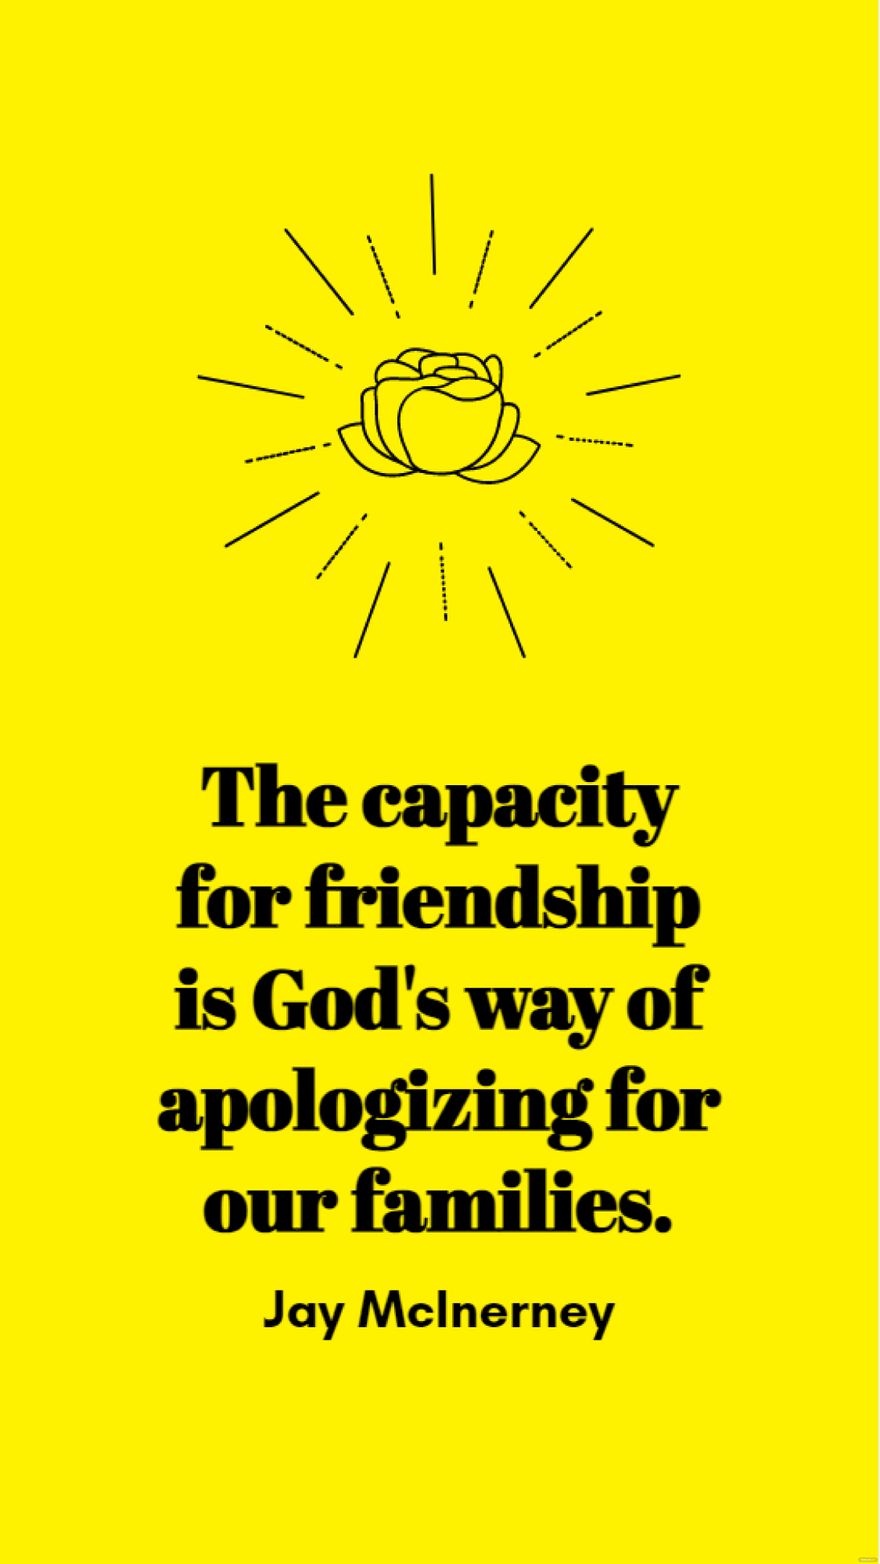 Jay McInerney - The capacity for friendship is God's way of apologizing for our families.